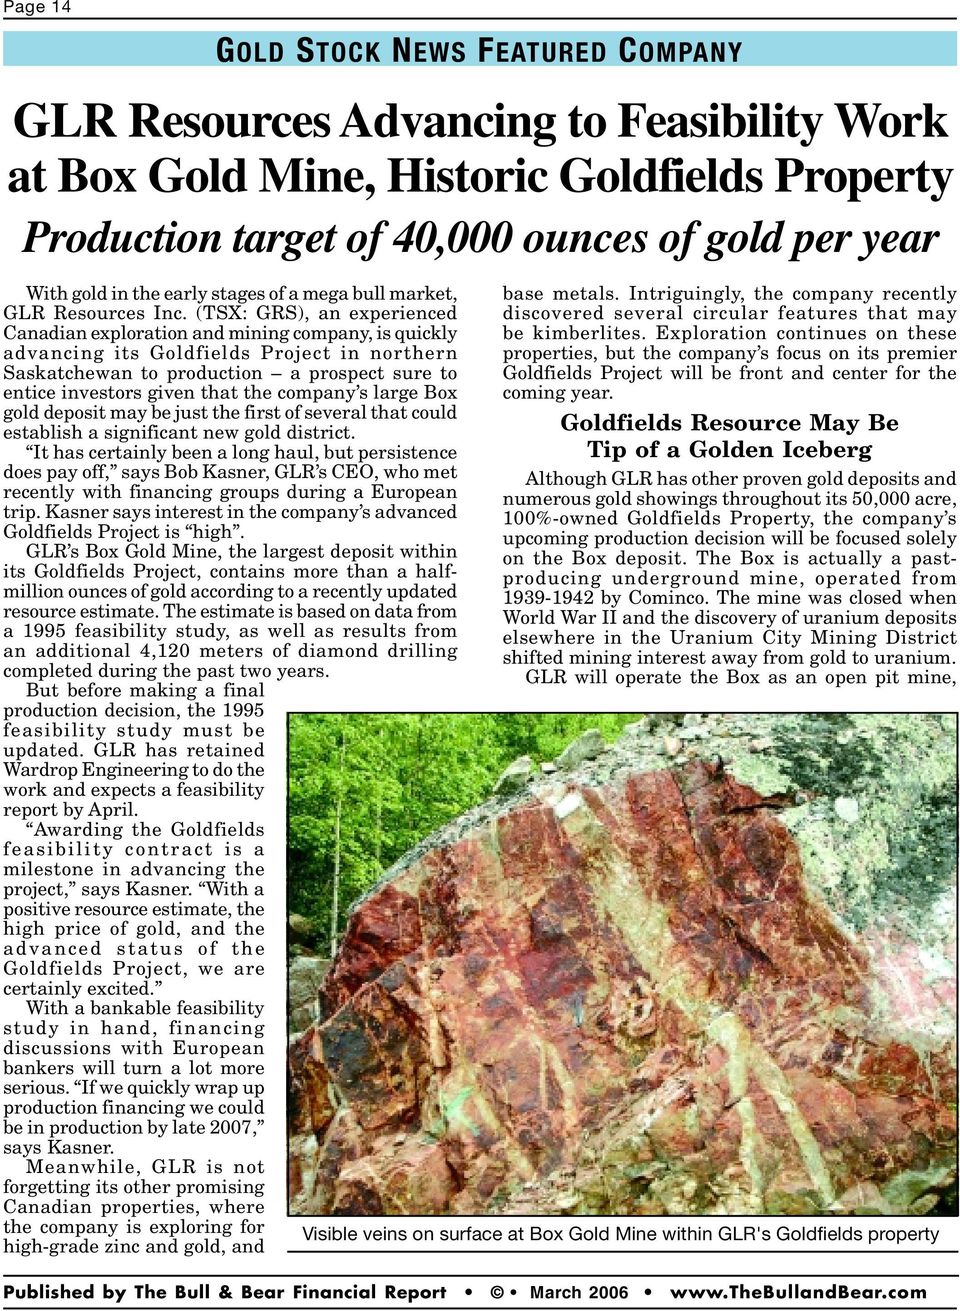 (TSX: GRS), an experienced Canadian exploration and mining company, is quickly advancing its Goldfields Project in northern Saskatchewan to production a prospect sure to entice investors given that